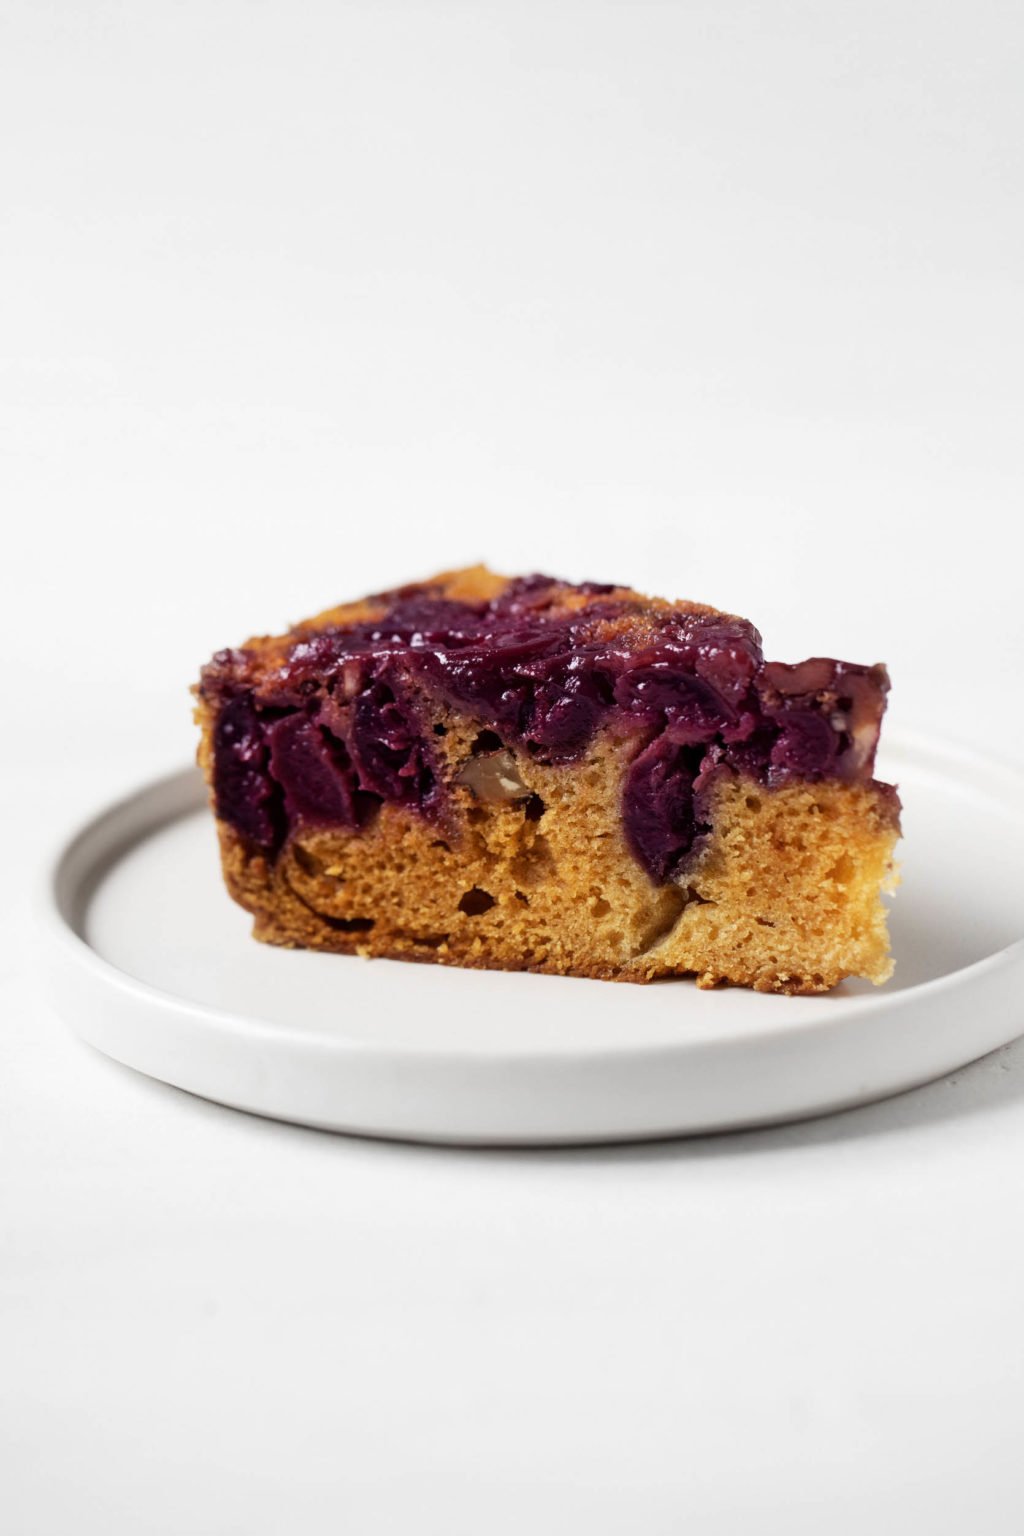 An angled photograph of a neat slice of vegan cherry upside down cake.